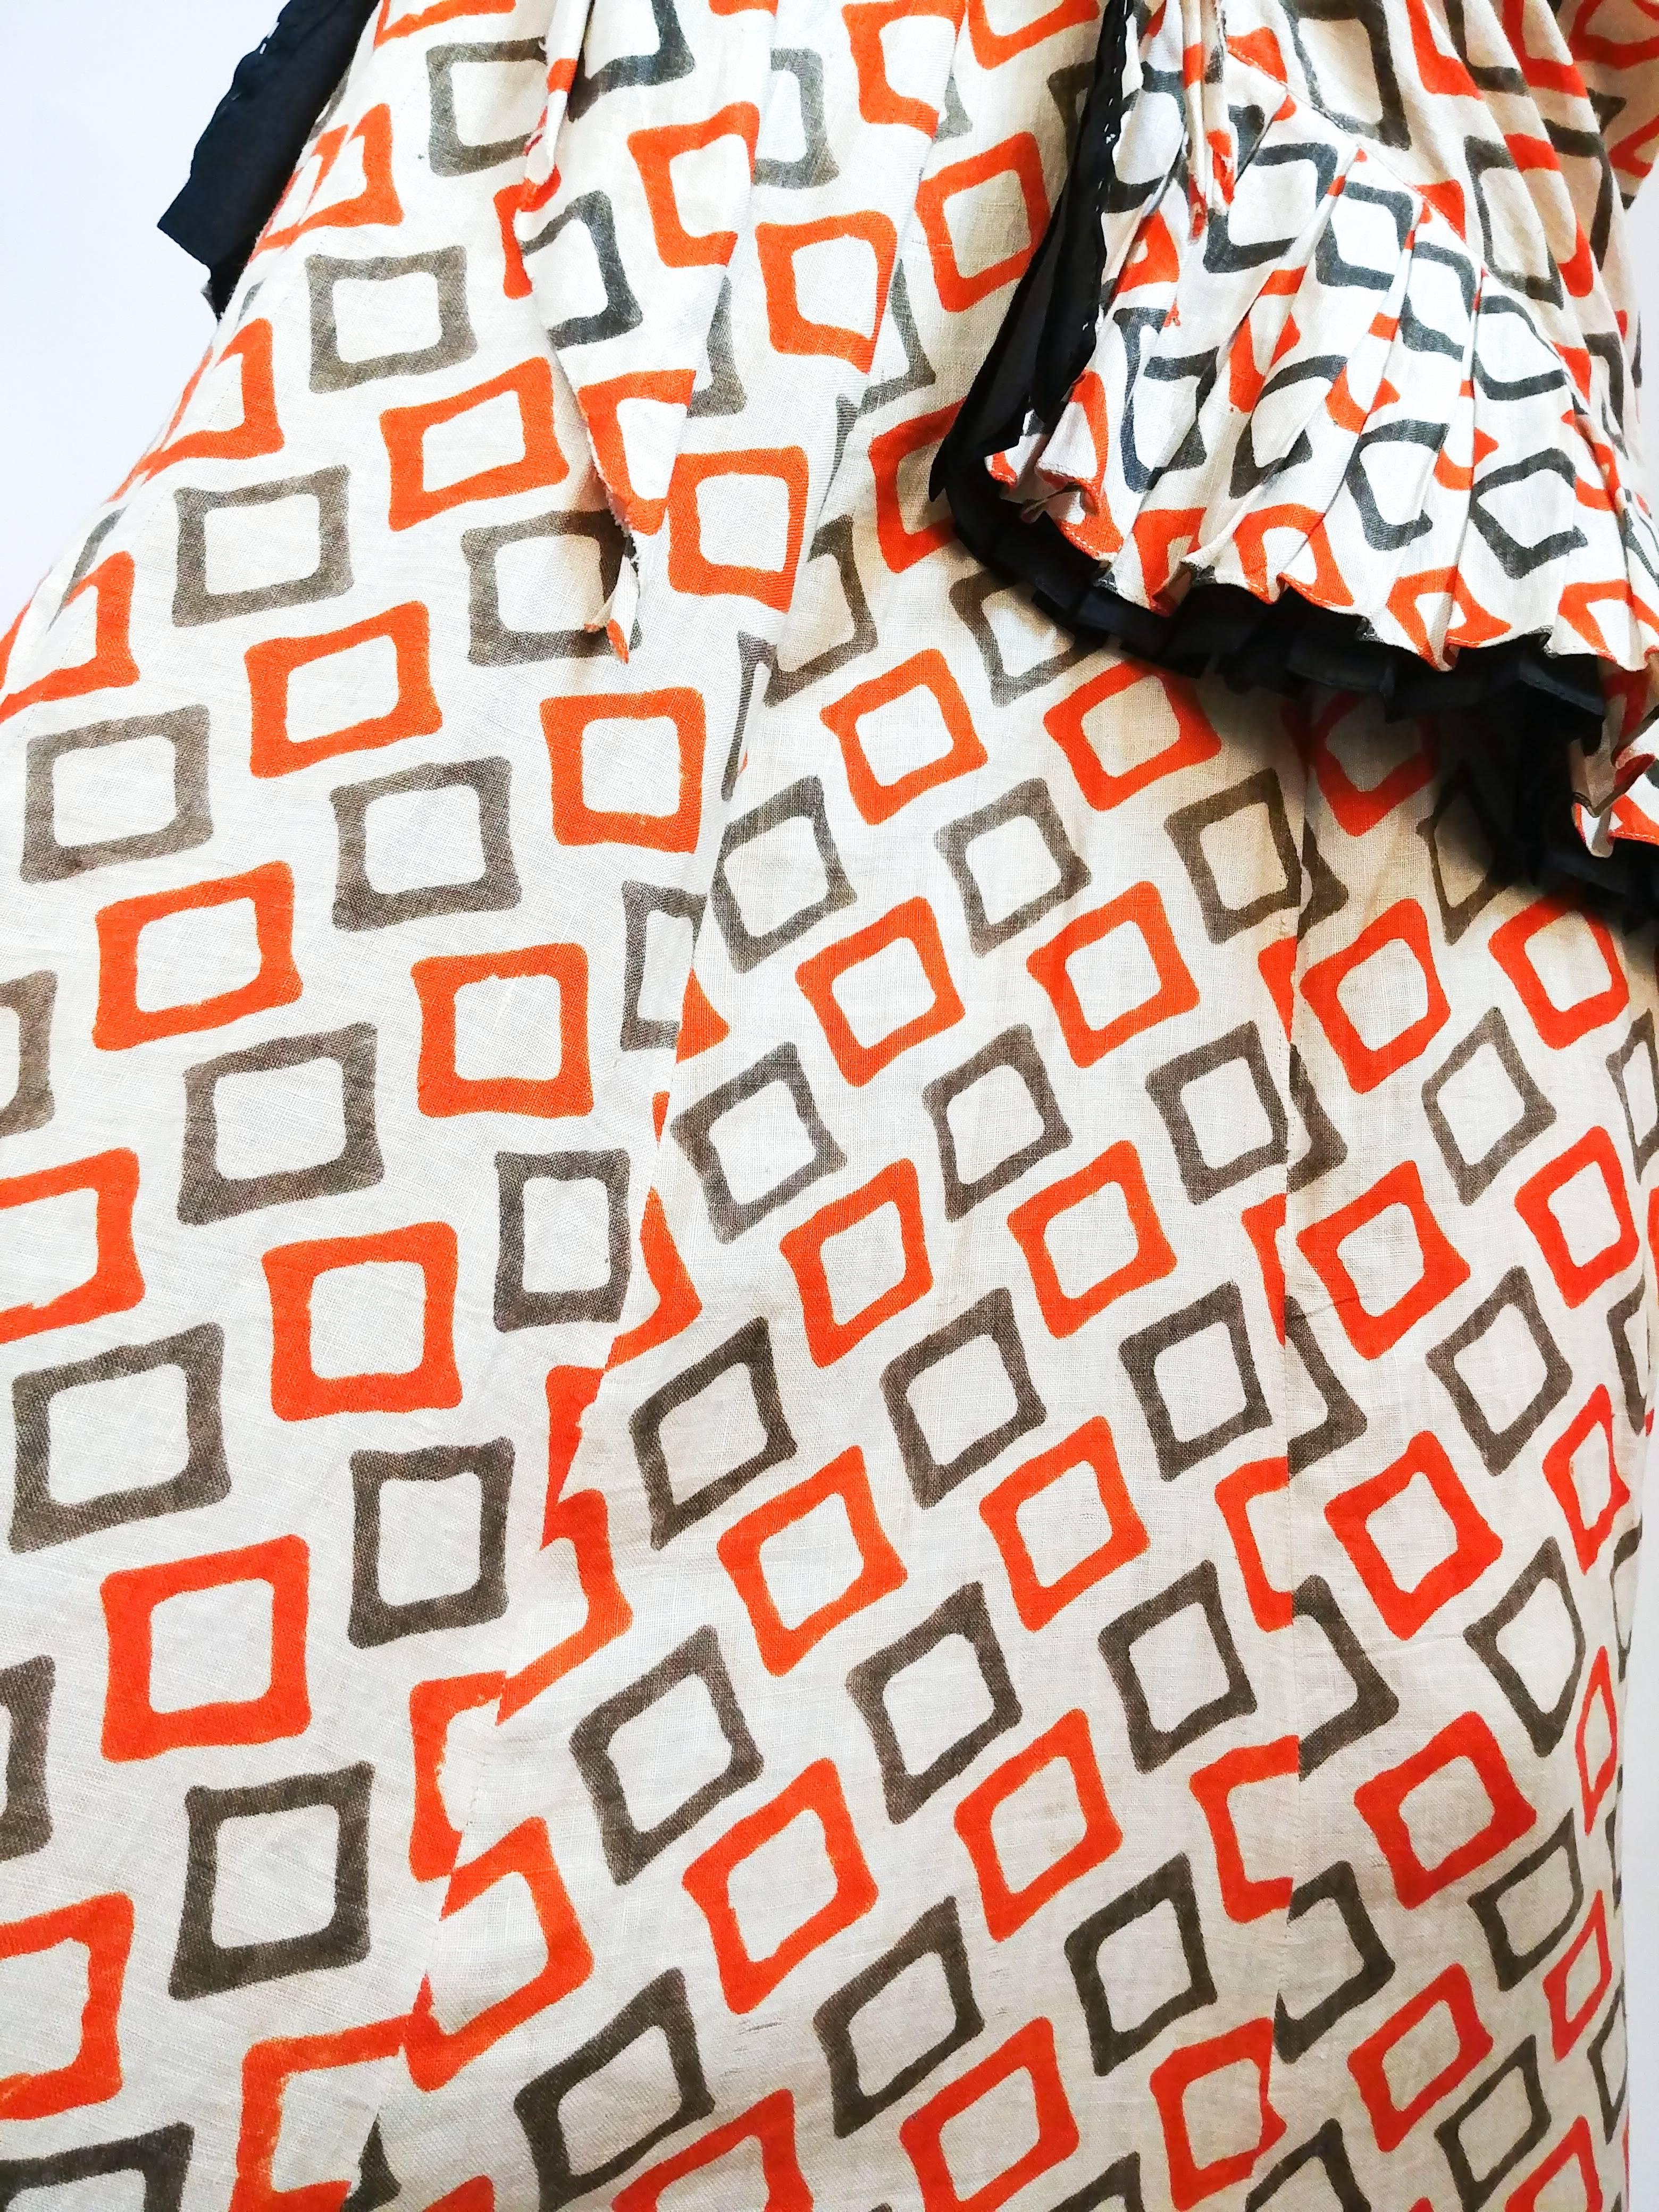 1930s Geometric Printed Cotton Dress. Orange and grey novelty print full-length dress with faux sarong wrap at waist and pleated ruffled detail at bust. 